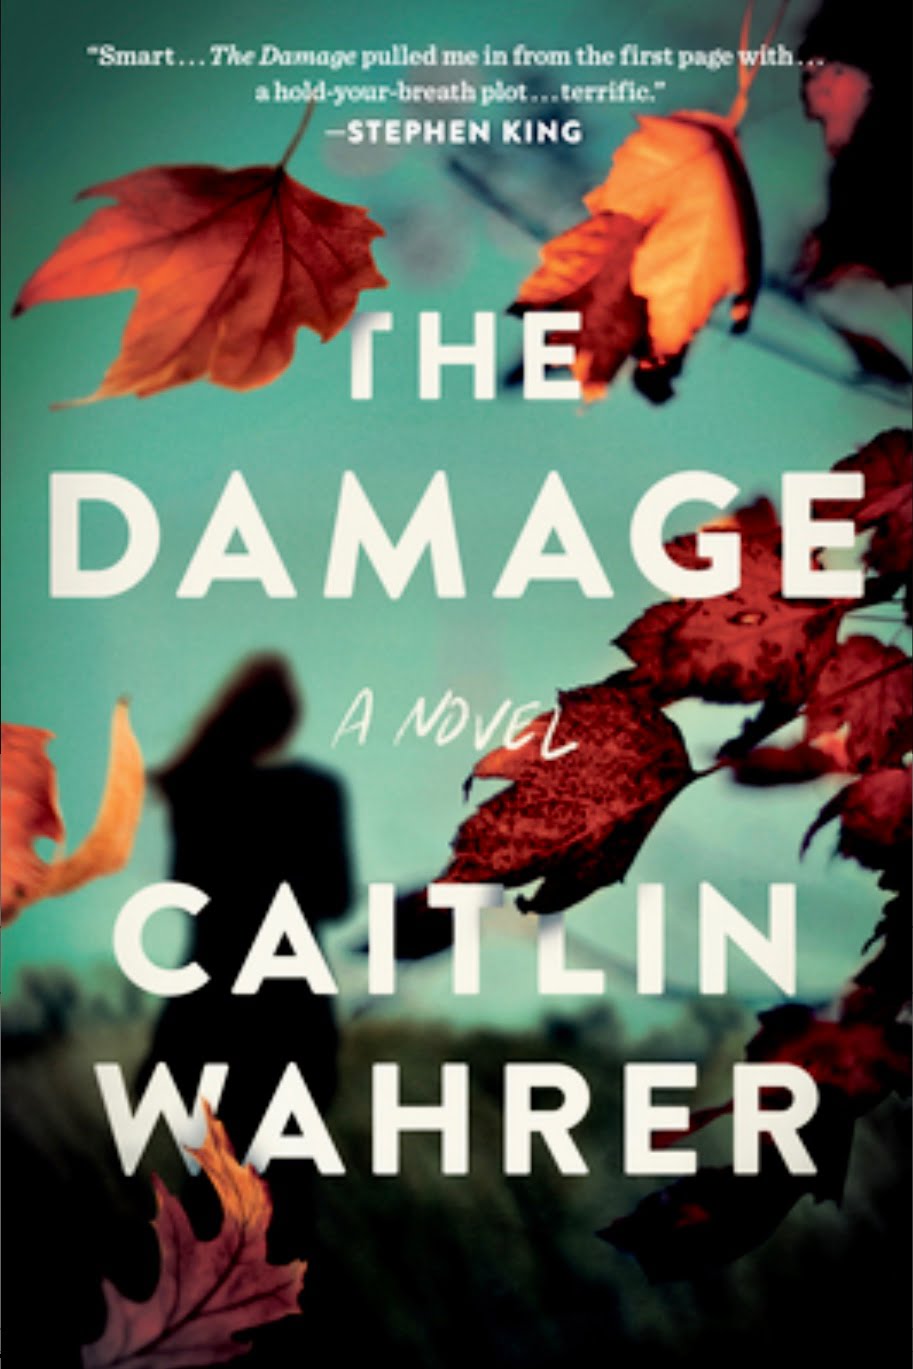 THE DAMAGE BY CAITLIN WAHRER – BOOK REVIEW